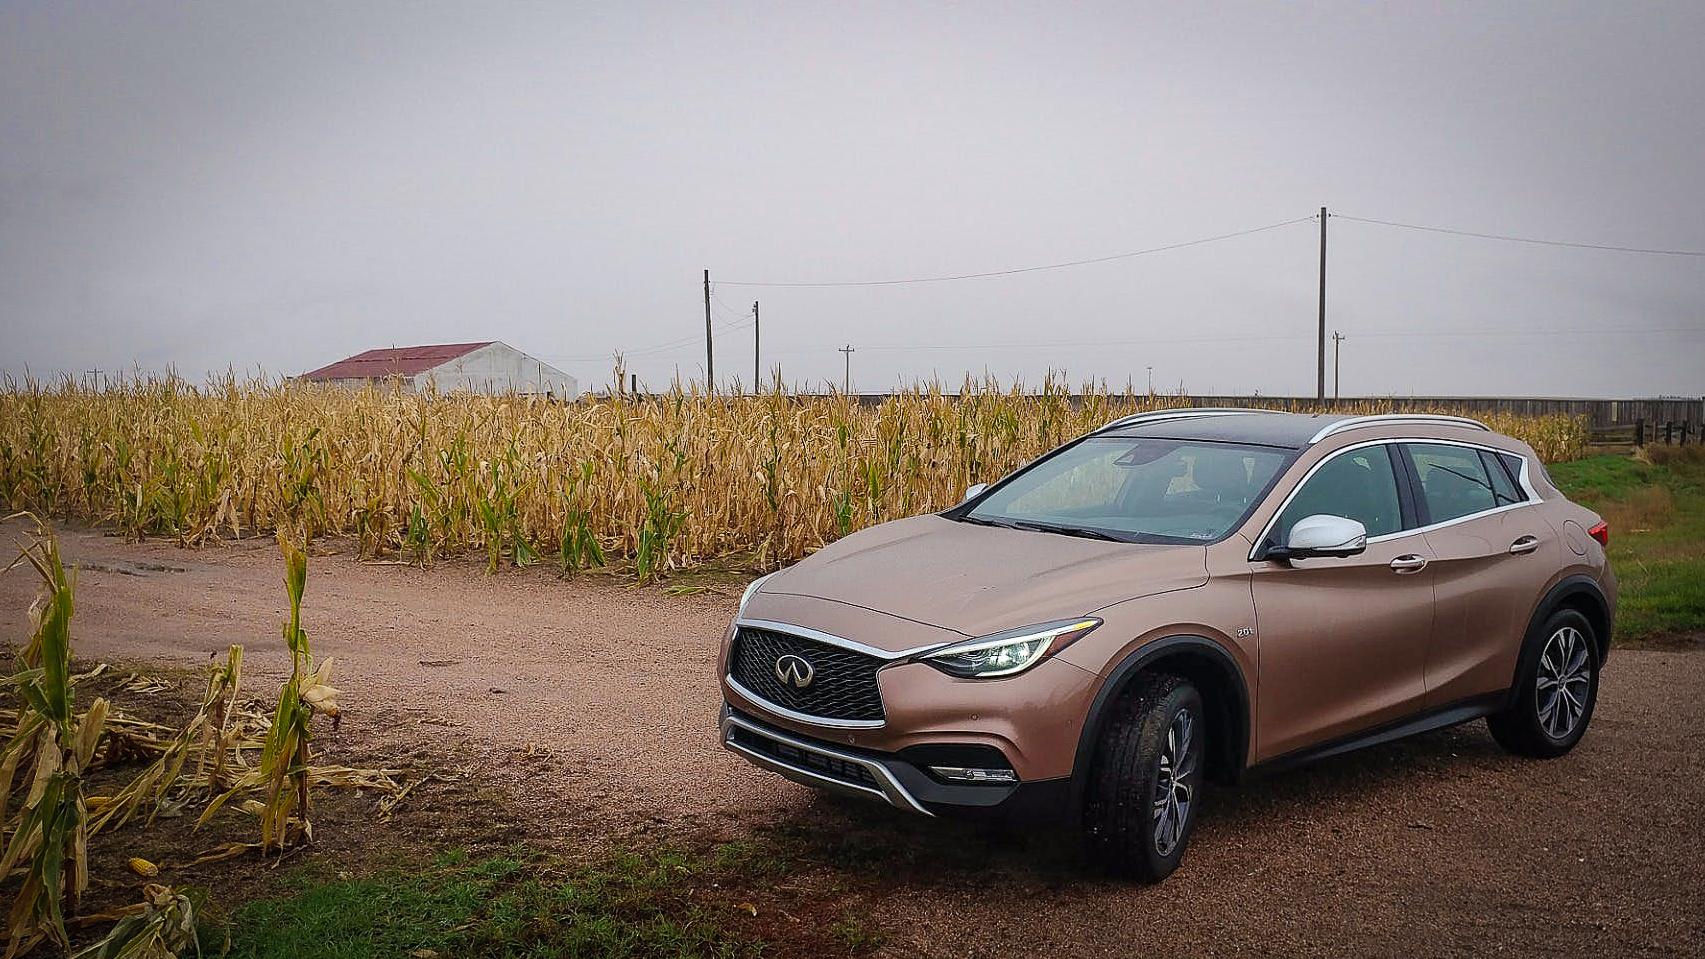 Review: 2018 Infiniti QX30 crossover scales down sportiness and luxury